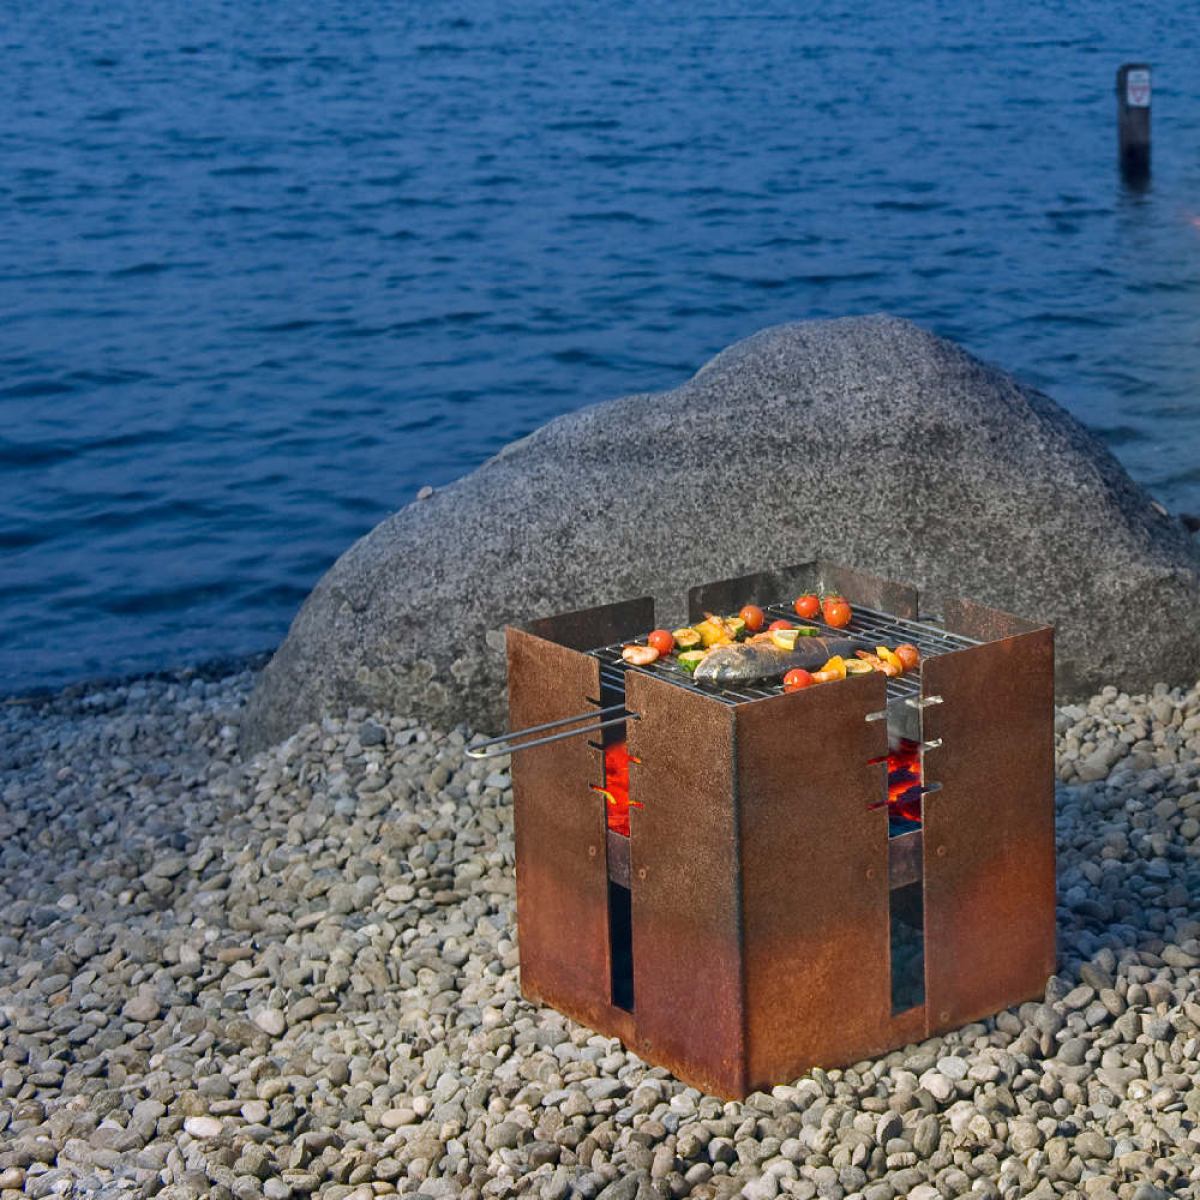 Cube-Shaped Fire Basket made of Steel with Grill Option